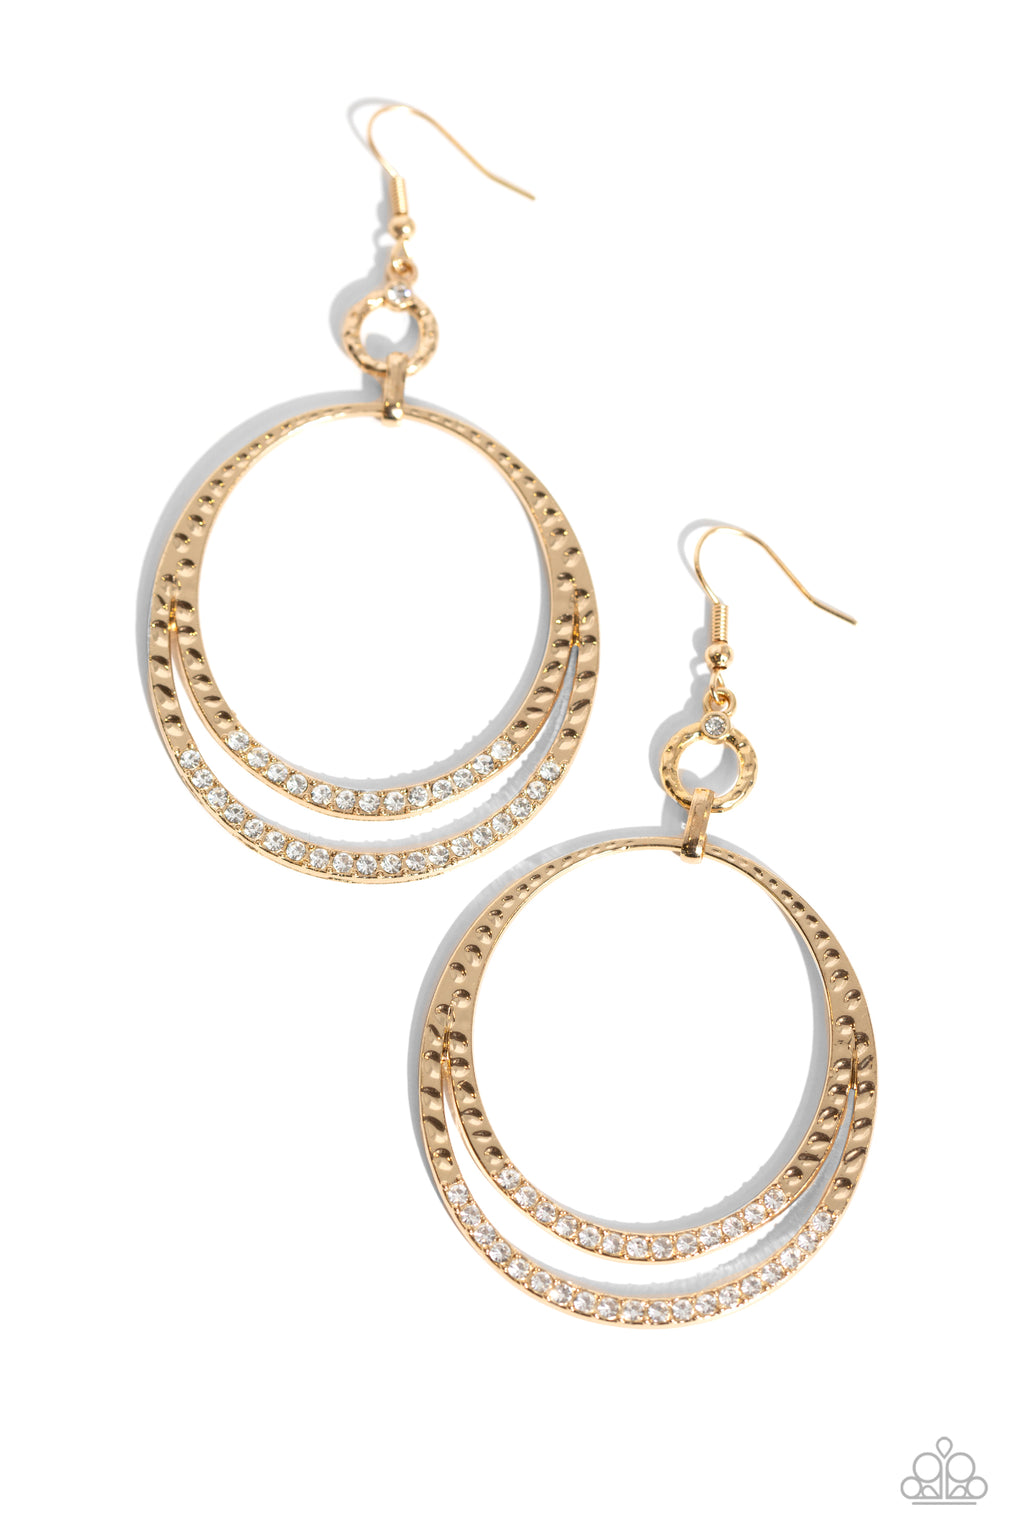 five-dollar-jewelry-spin-your-heels-gold-earrings-paparazzi-accessories